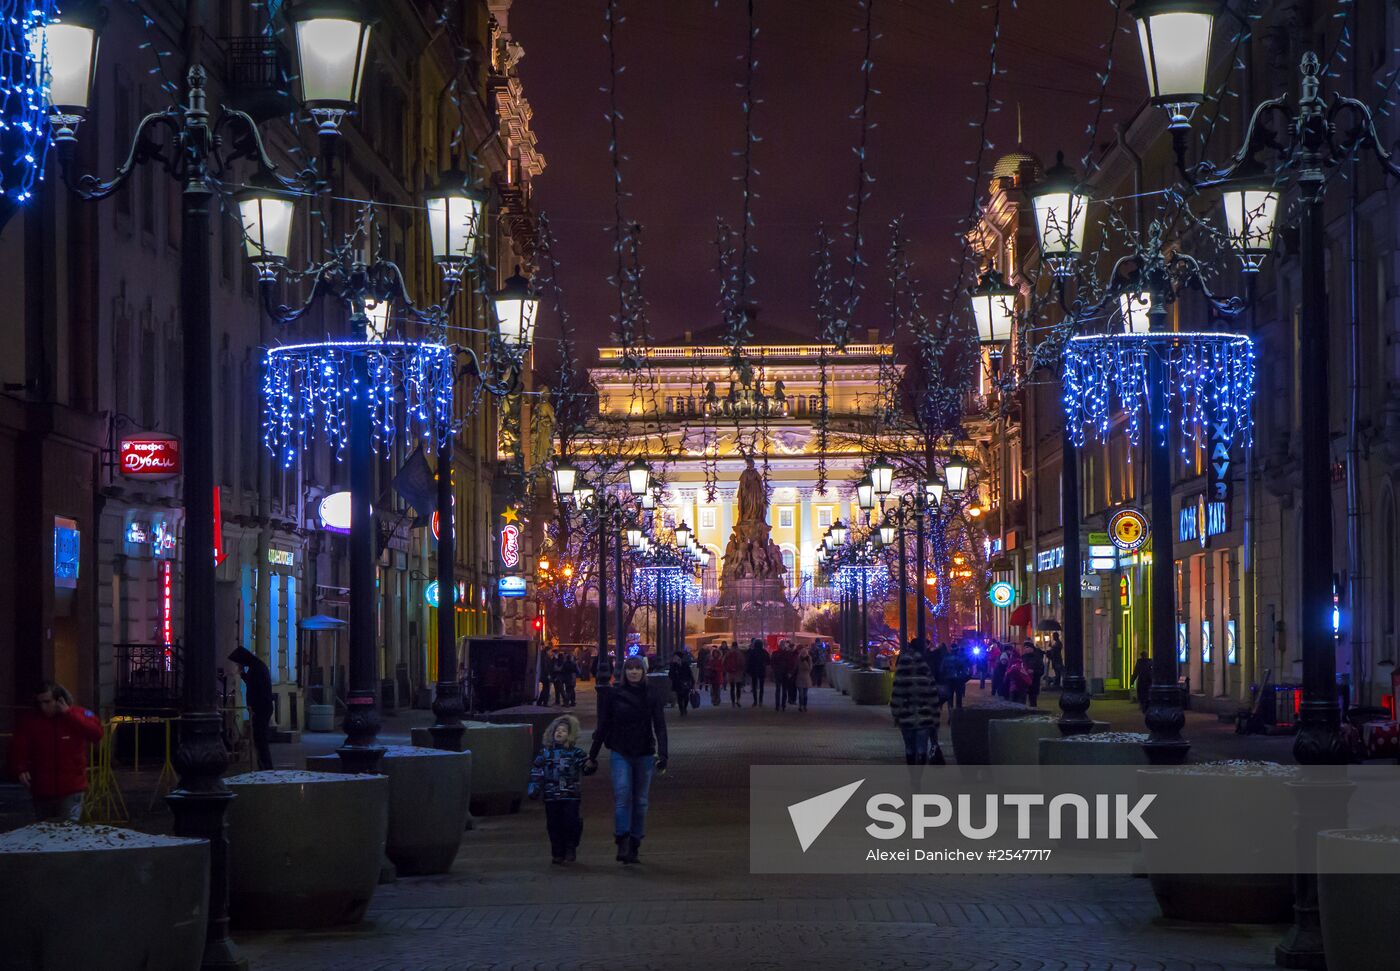 New Year decorations in St. Petersburg